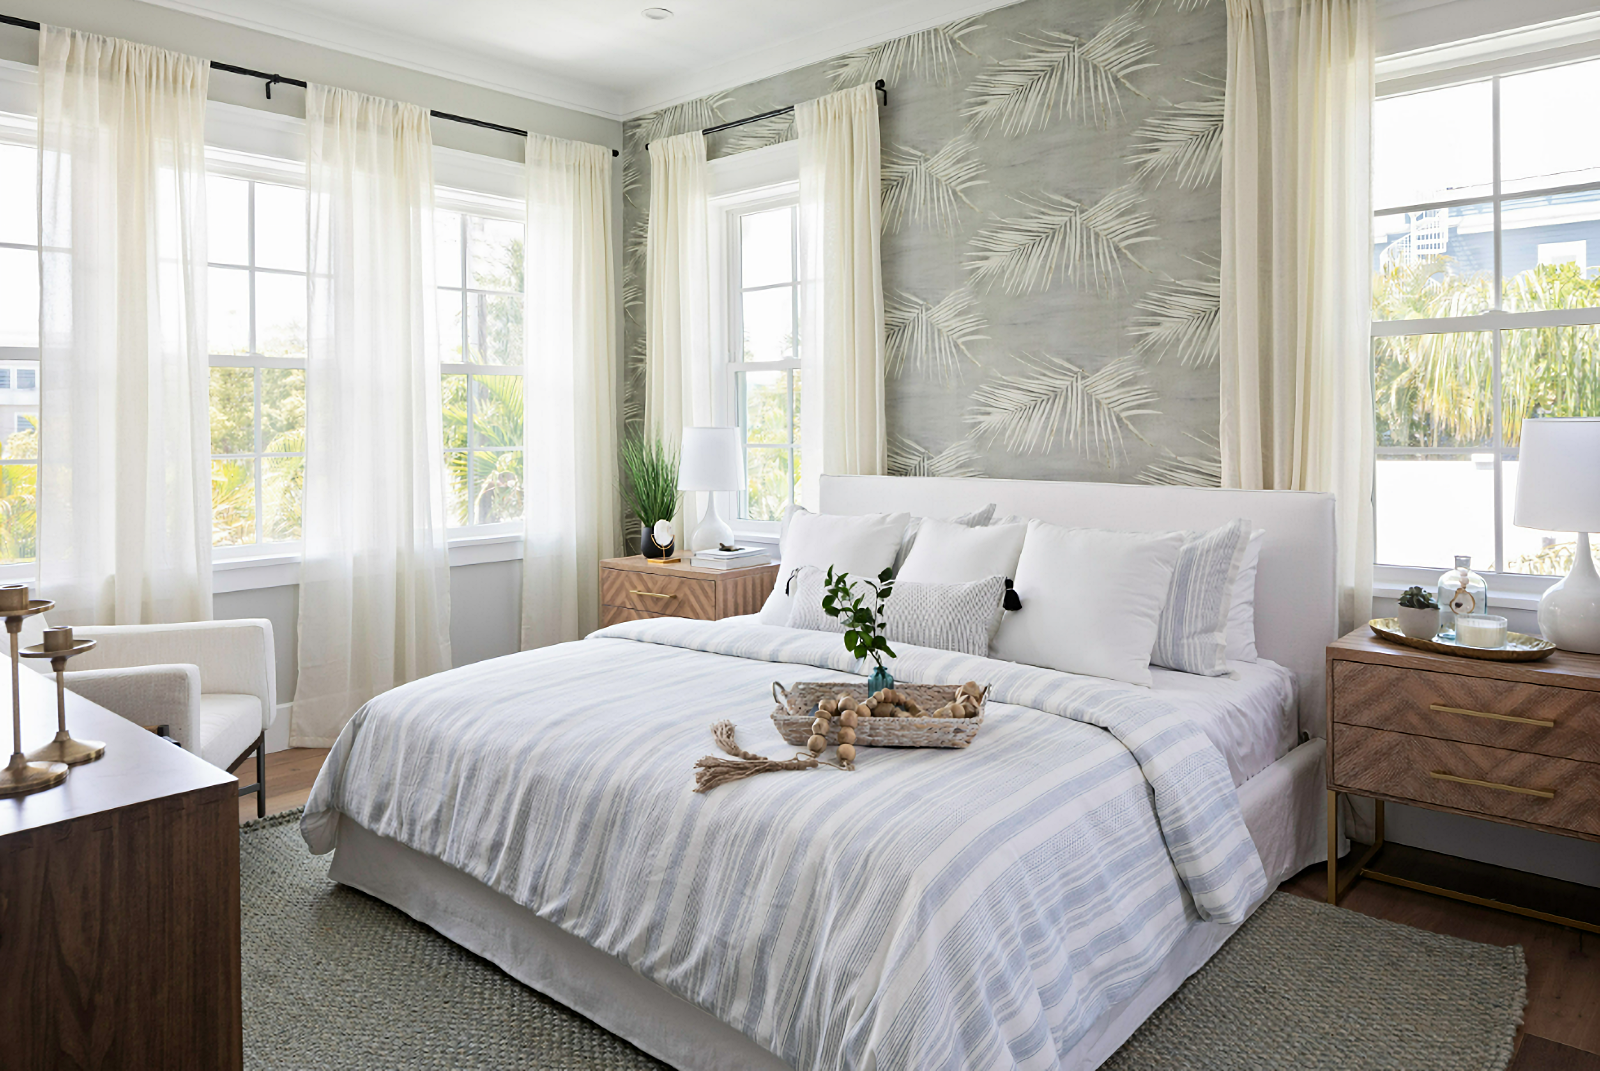 coastal style master bedroom in gray and white